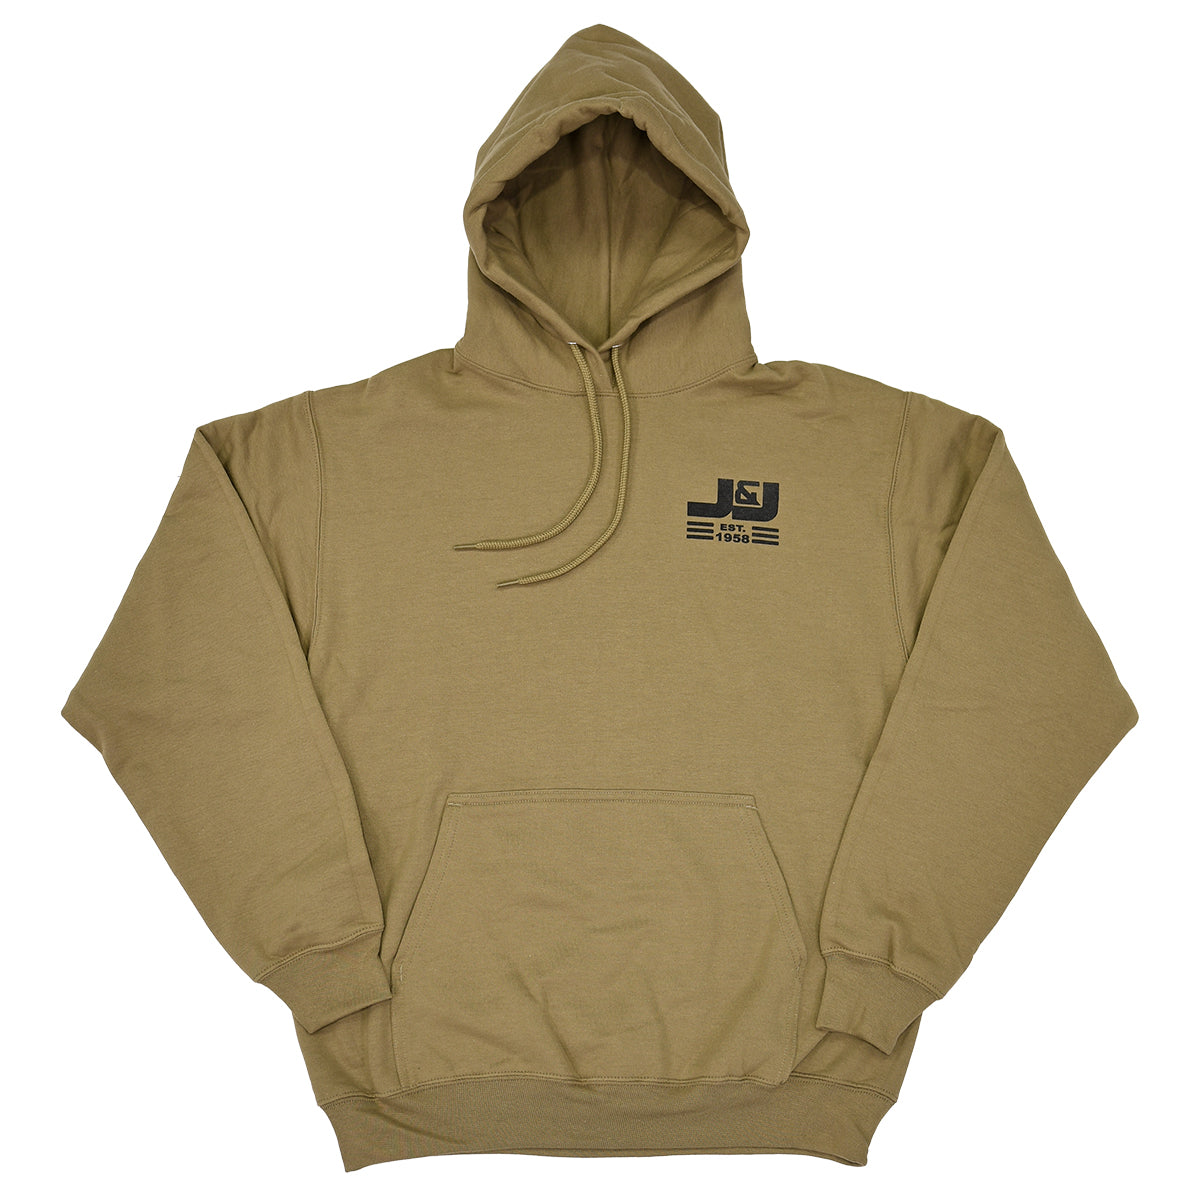 J&J Unisex Pullover Hooded Sweatshirt with Small Breast Logo